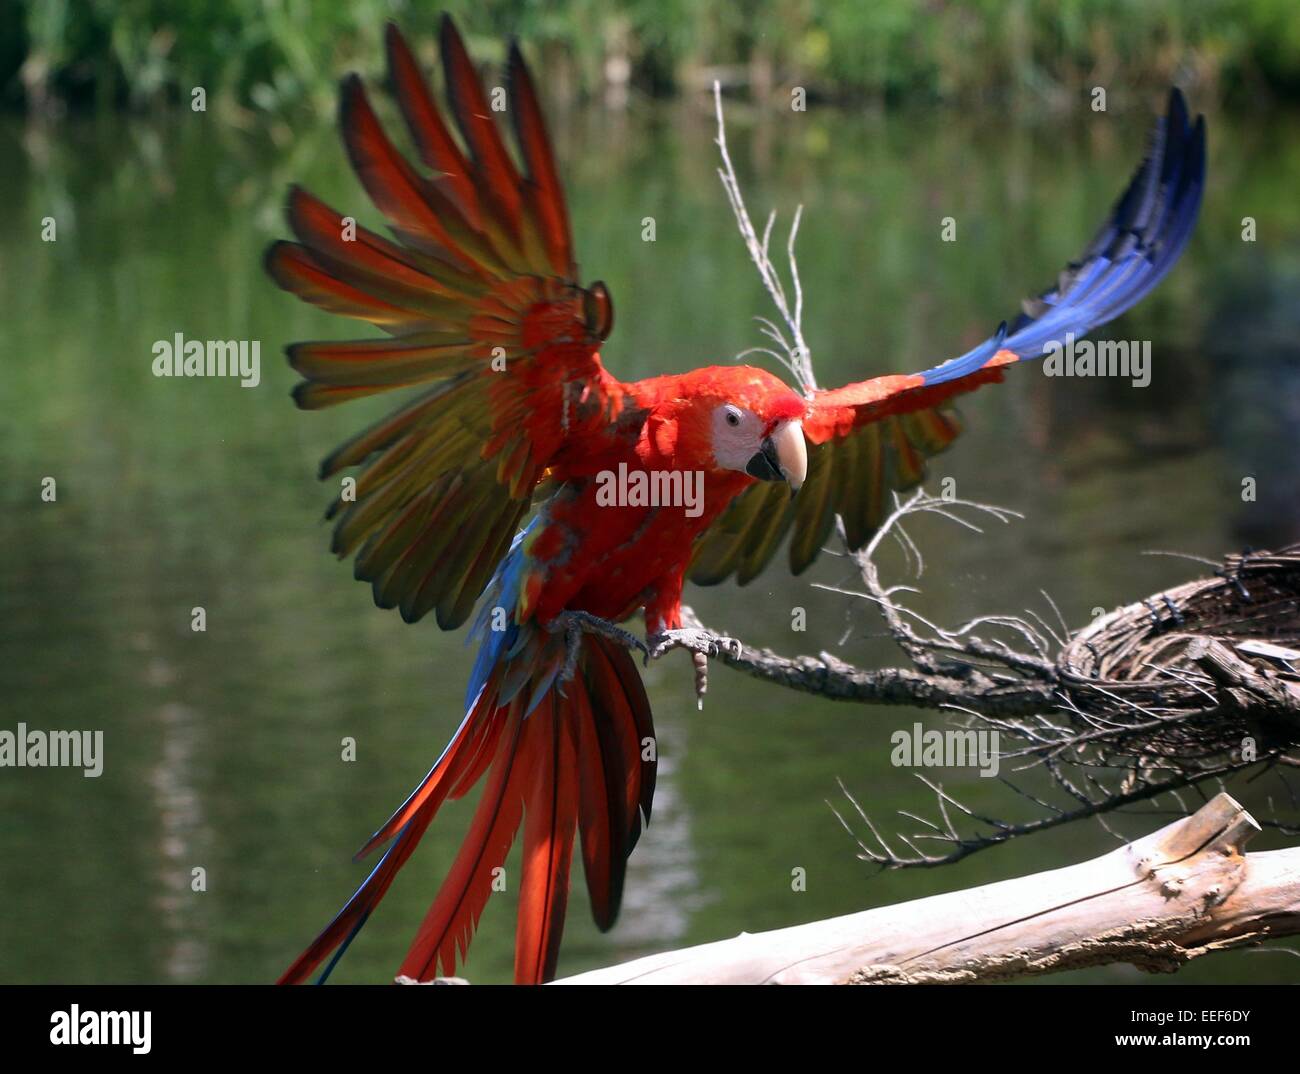 South American Scarlet macaw (Ara macao) with spread wings landing on a branch Stock Photo